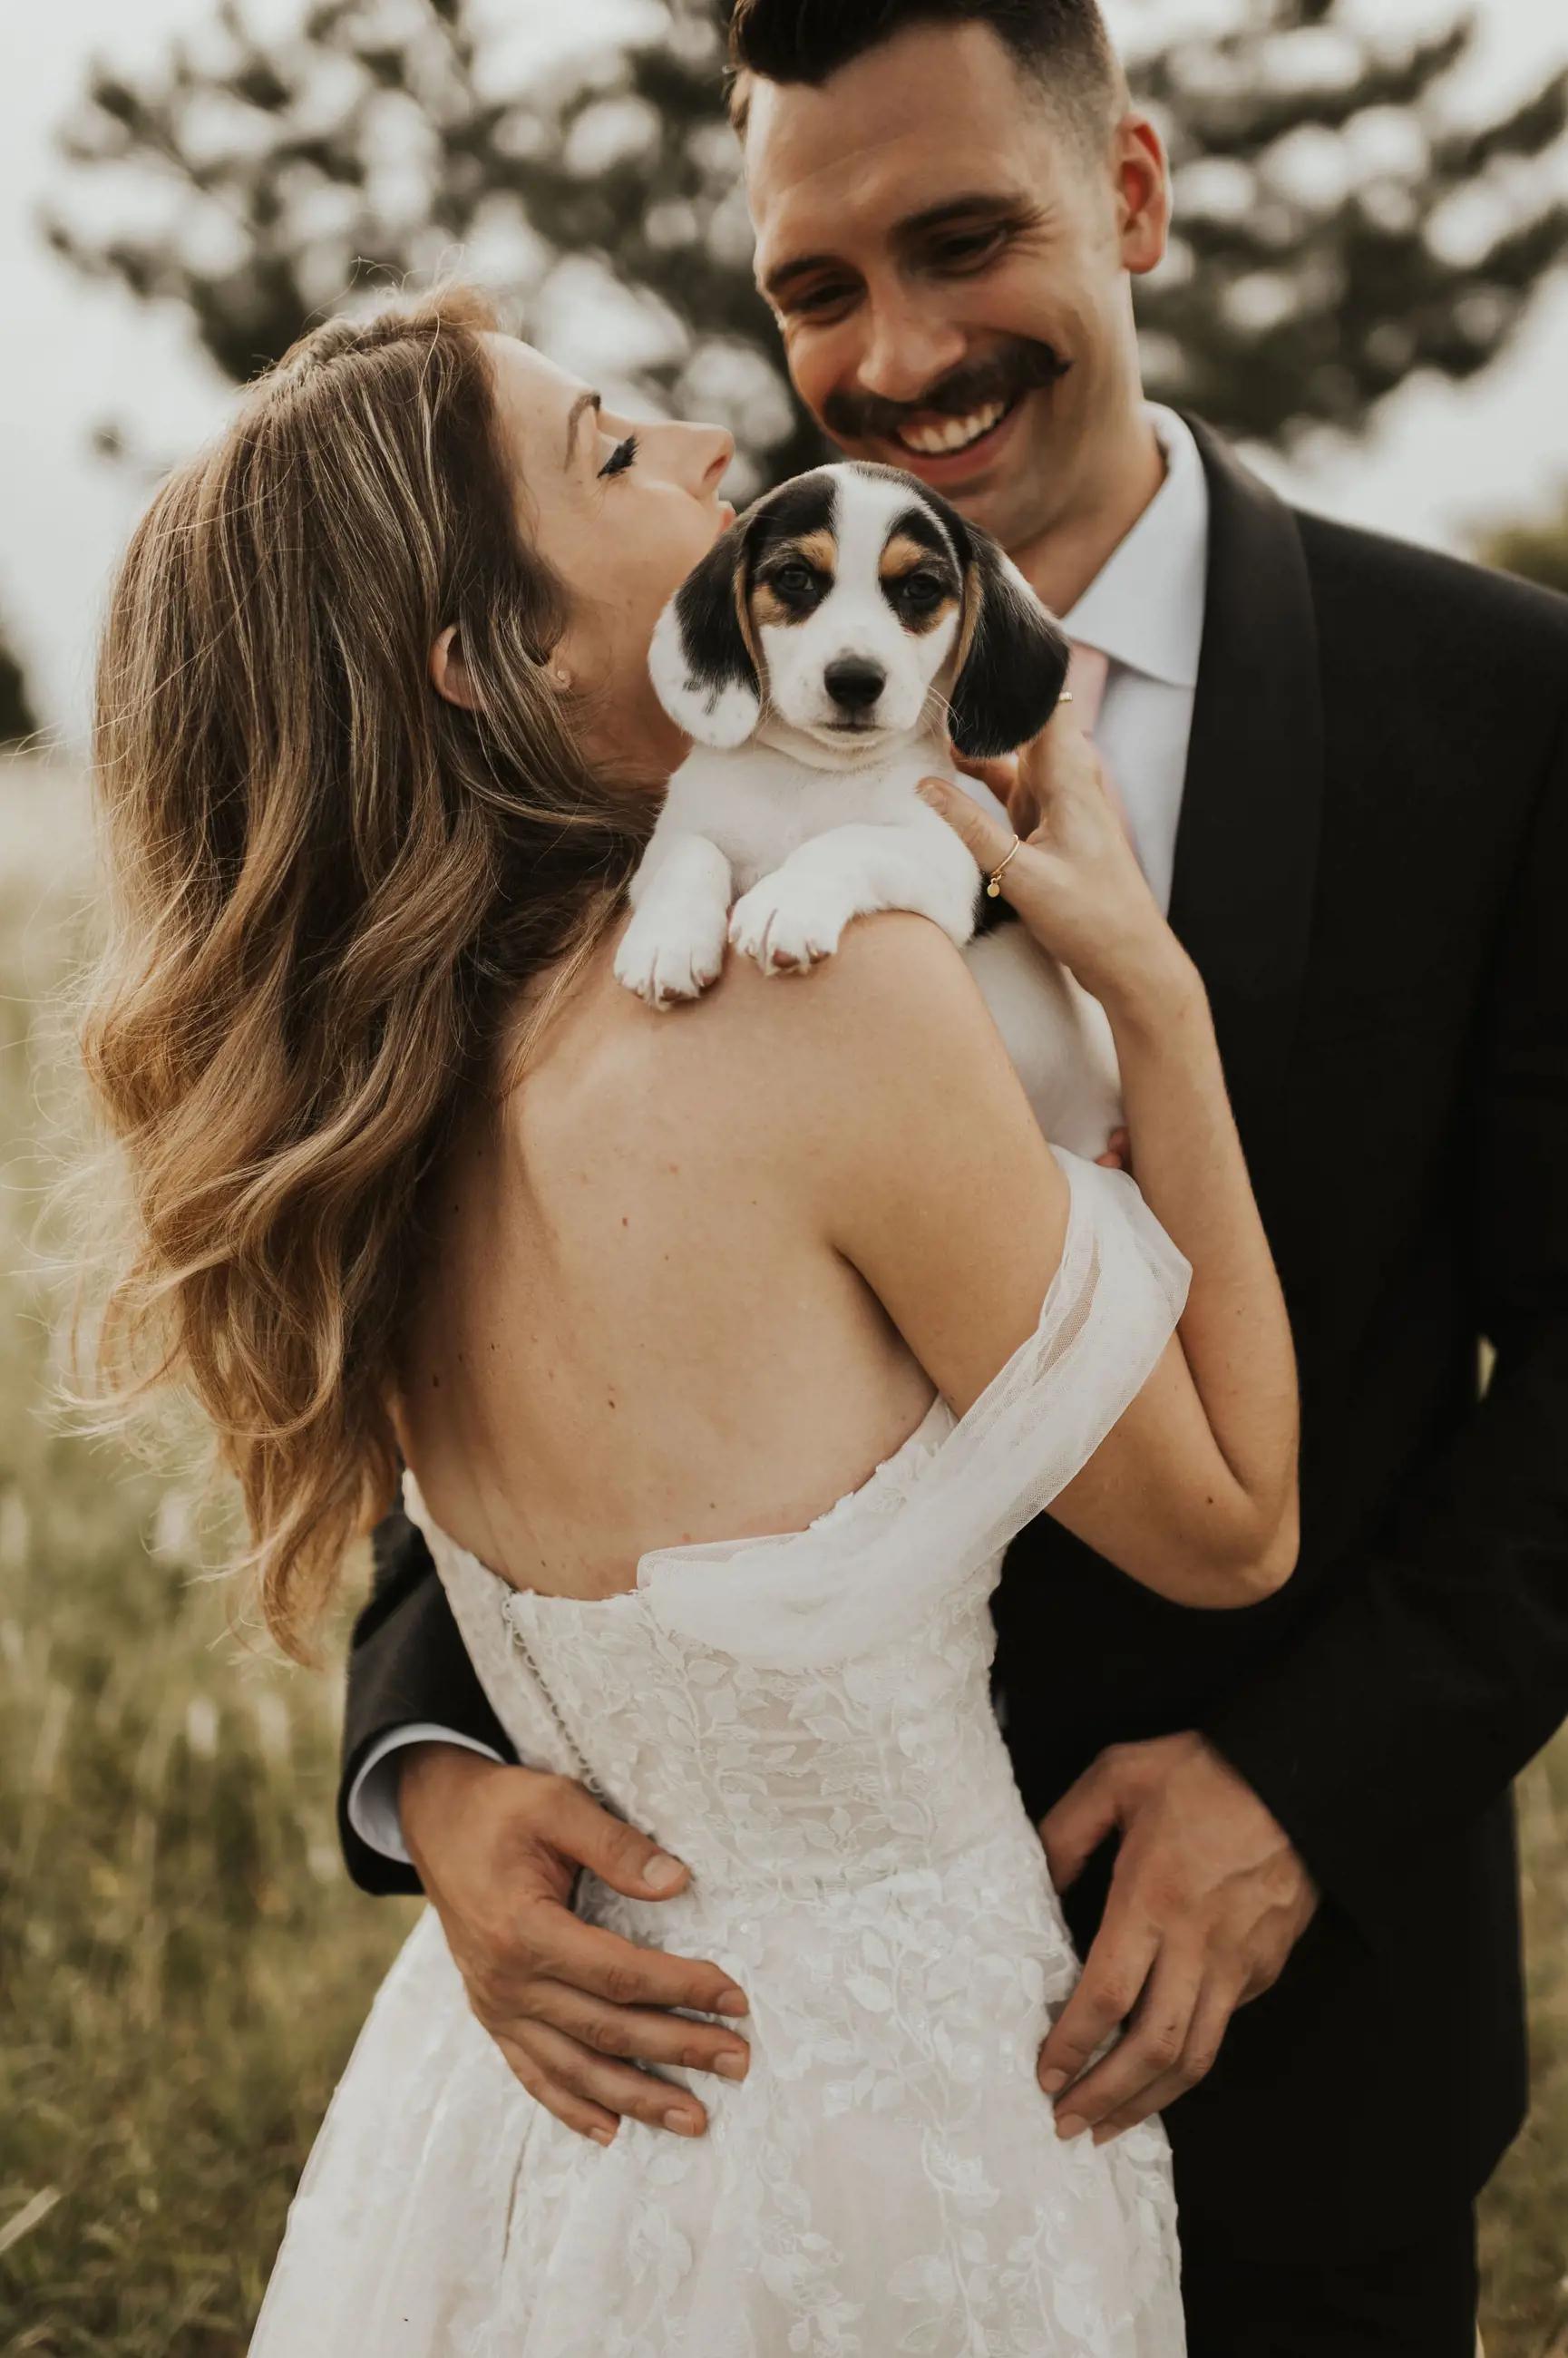 Puppy Fever Springtime Bridal Styled Shoot with KHS! Image